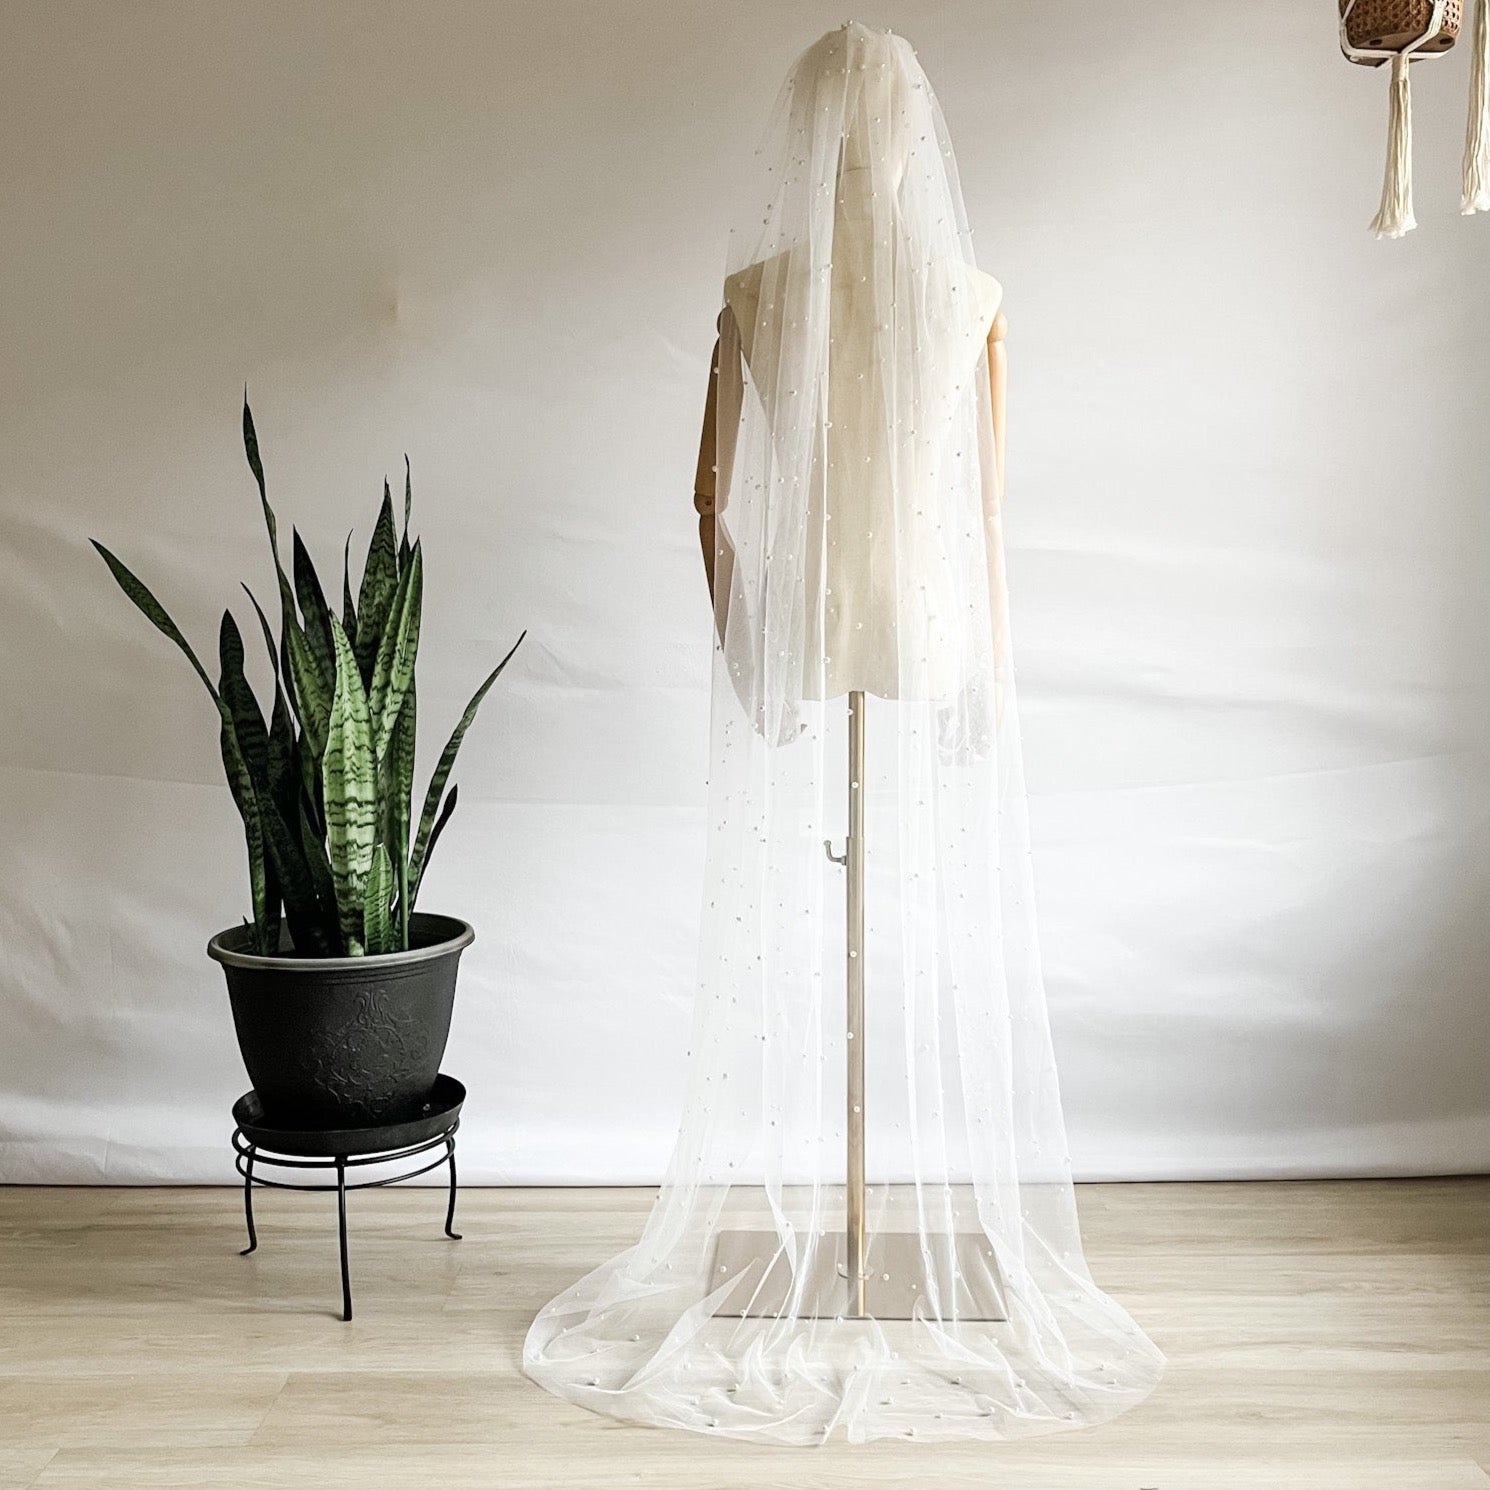 Wedding Pearl Veil Pure White / Chapel - 90 Inches (in The Photos)